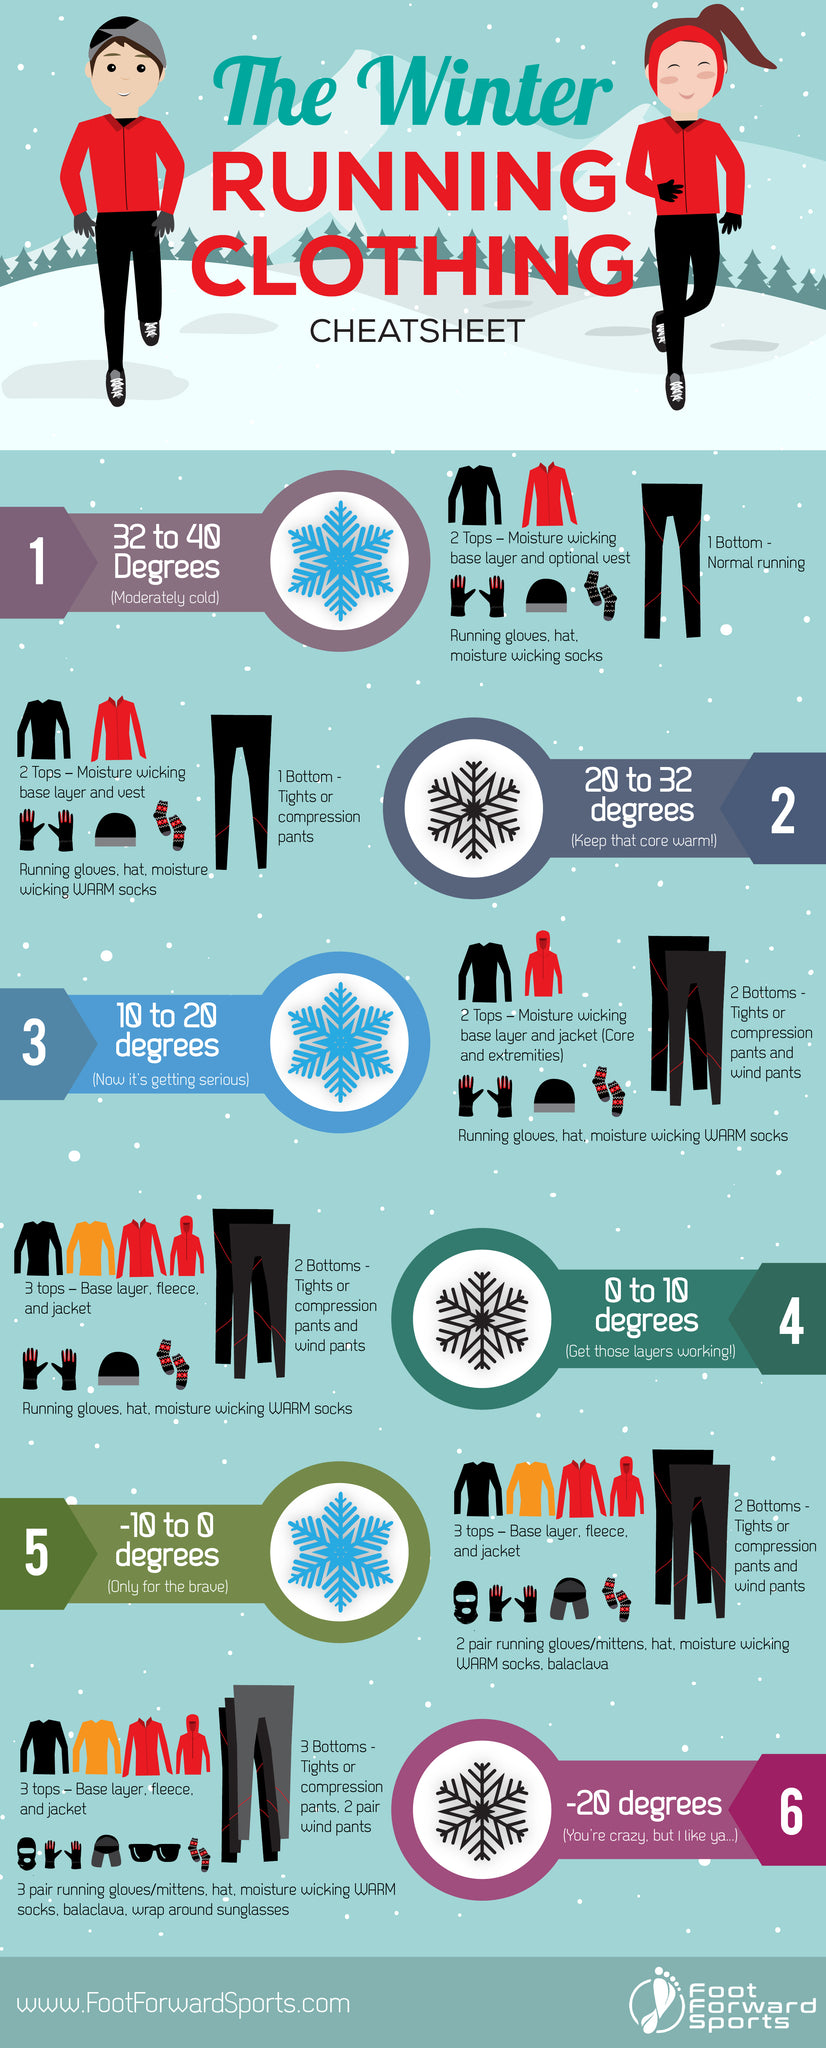 9 Tips For Cold Weather Running Success | Foot Forward Sports